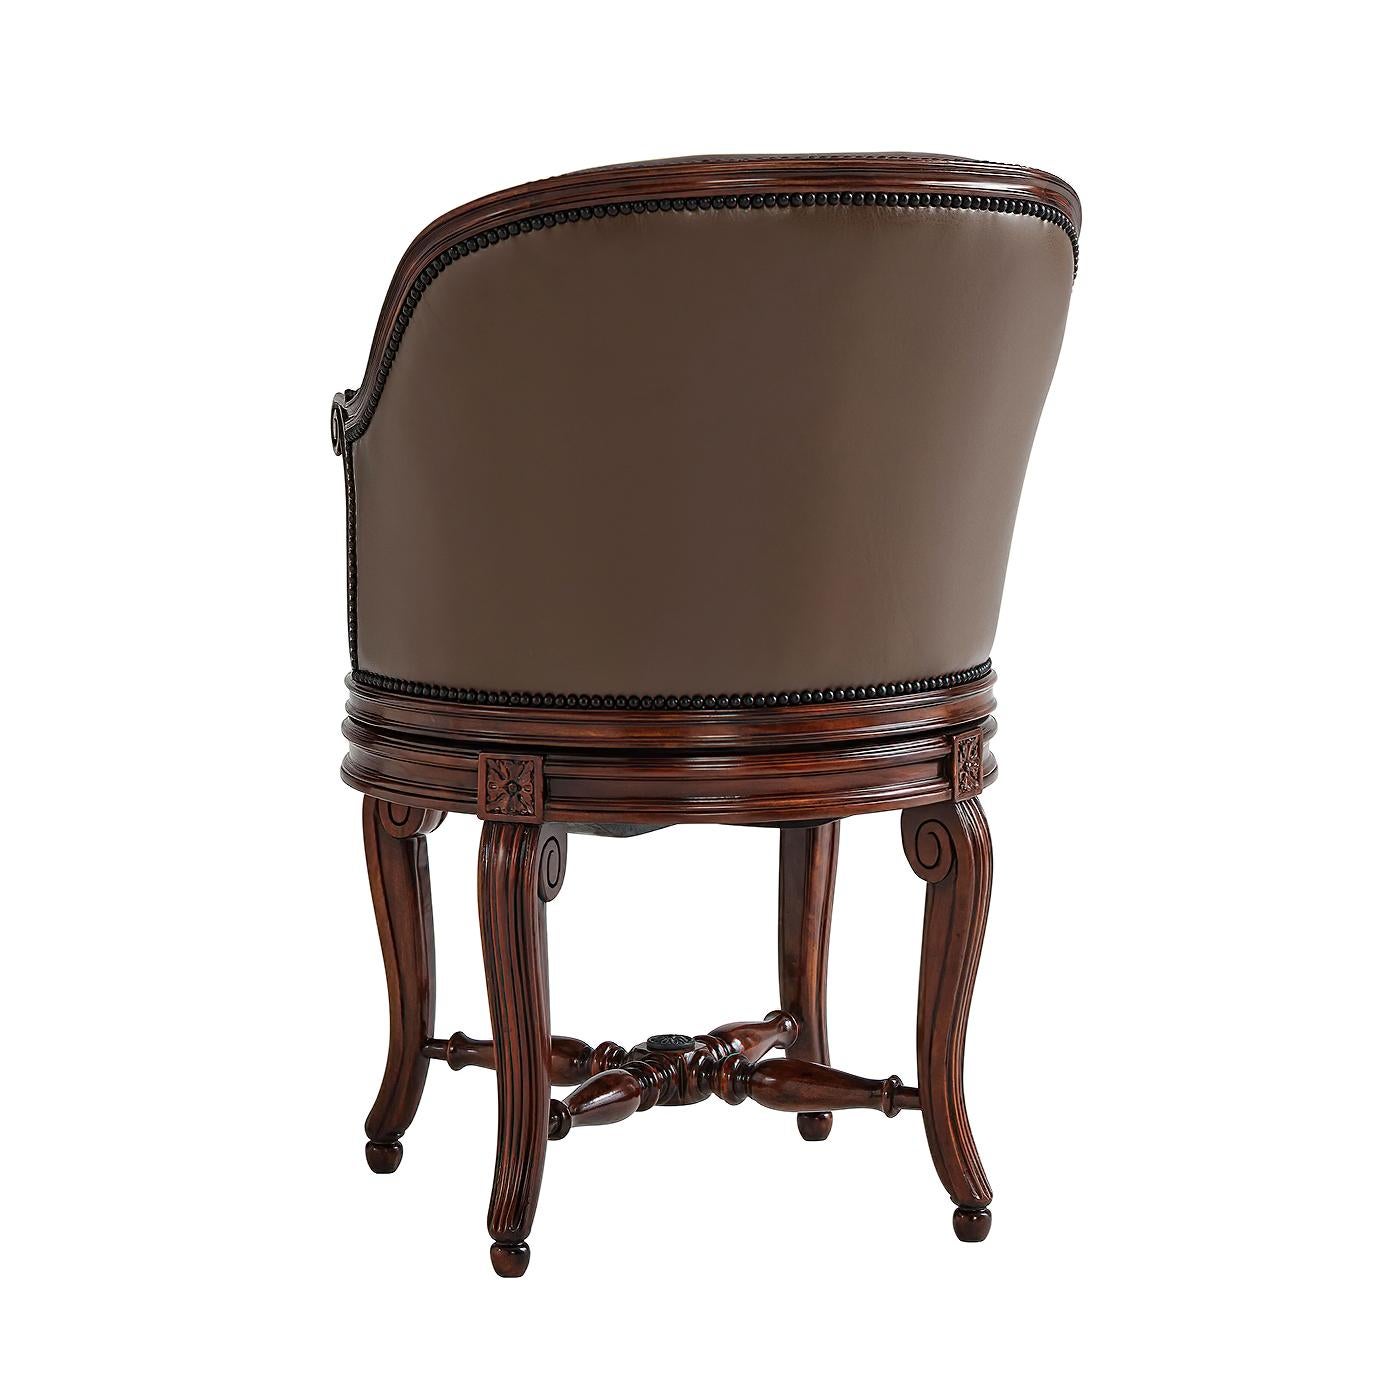 A French Louis XVI style leather upholstered walnut desk armchair, with a circular swivel action, upholstered seat, carved scroll arms and legs and an 'x' stretcher. The leather upholstery with antiqued brass nailhead trim.

Dimensions: 22